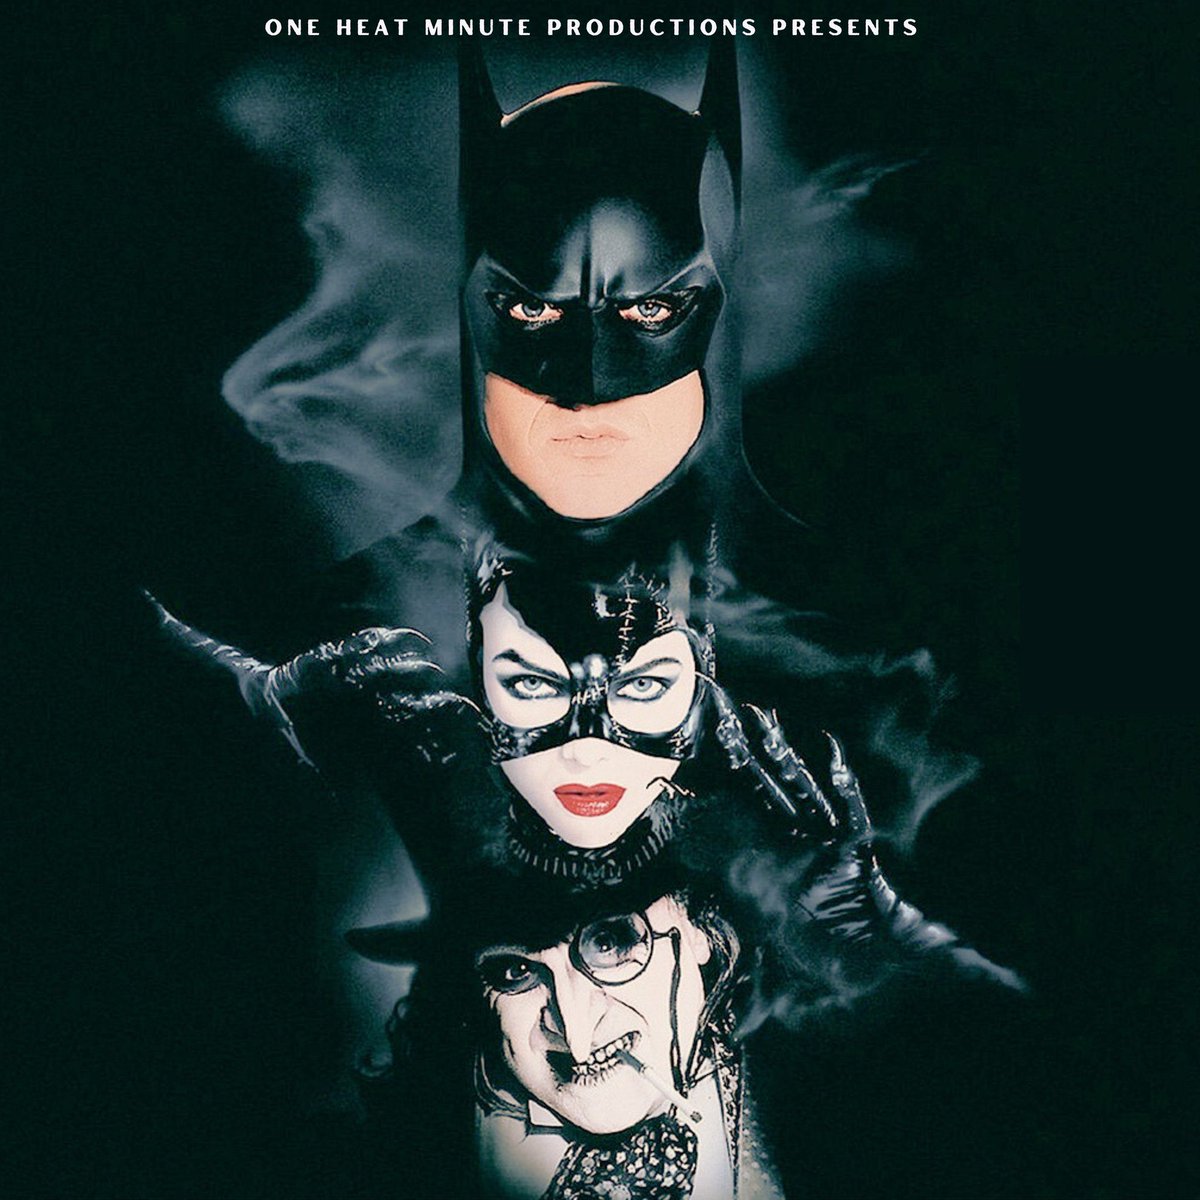 Honestly, one of the most sought after guests ever on @OHMPods, has finally made her debut. @BBW_BFF is one of the best film minds working, and talking to her about movies that we love is a blessing and a joy. Come hear us gush about BATMAN RETURNS in chosen your pod feed